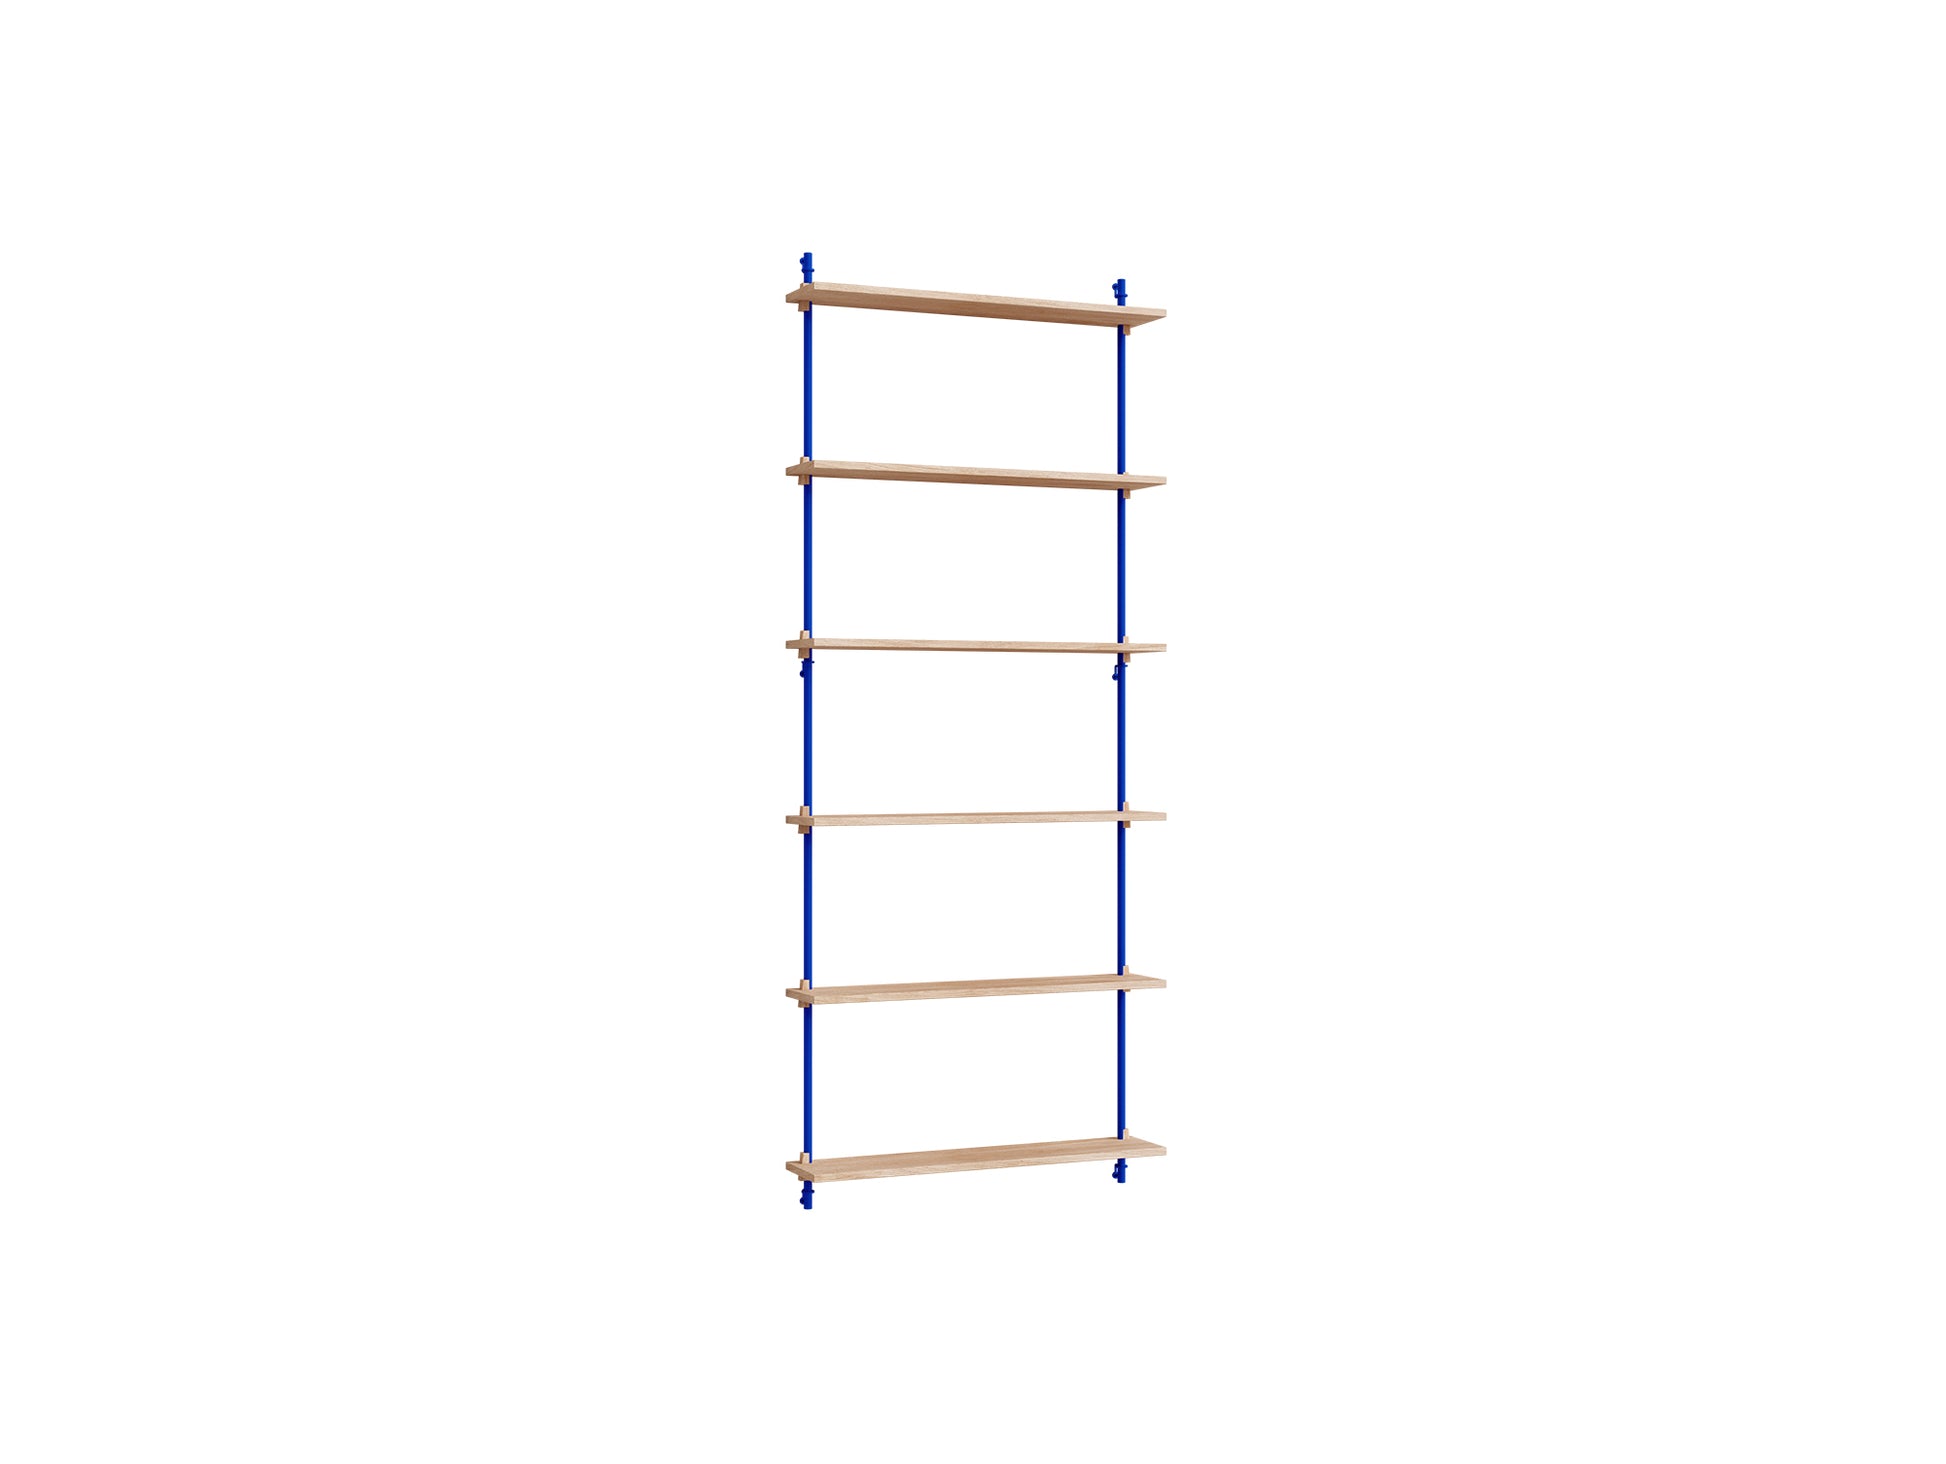 Wall Shelving System Sets (200 cm) by Moebe - WS.200.1 / Deep Blue Uprights / Oiled Oak